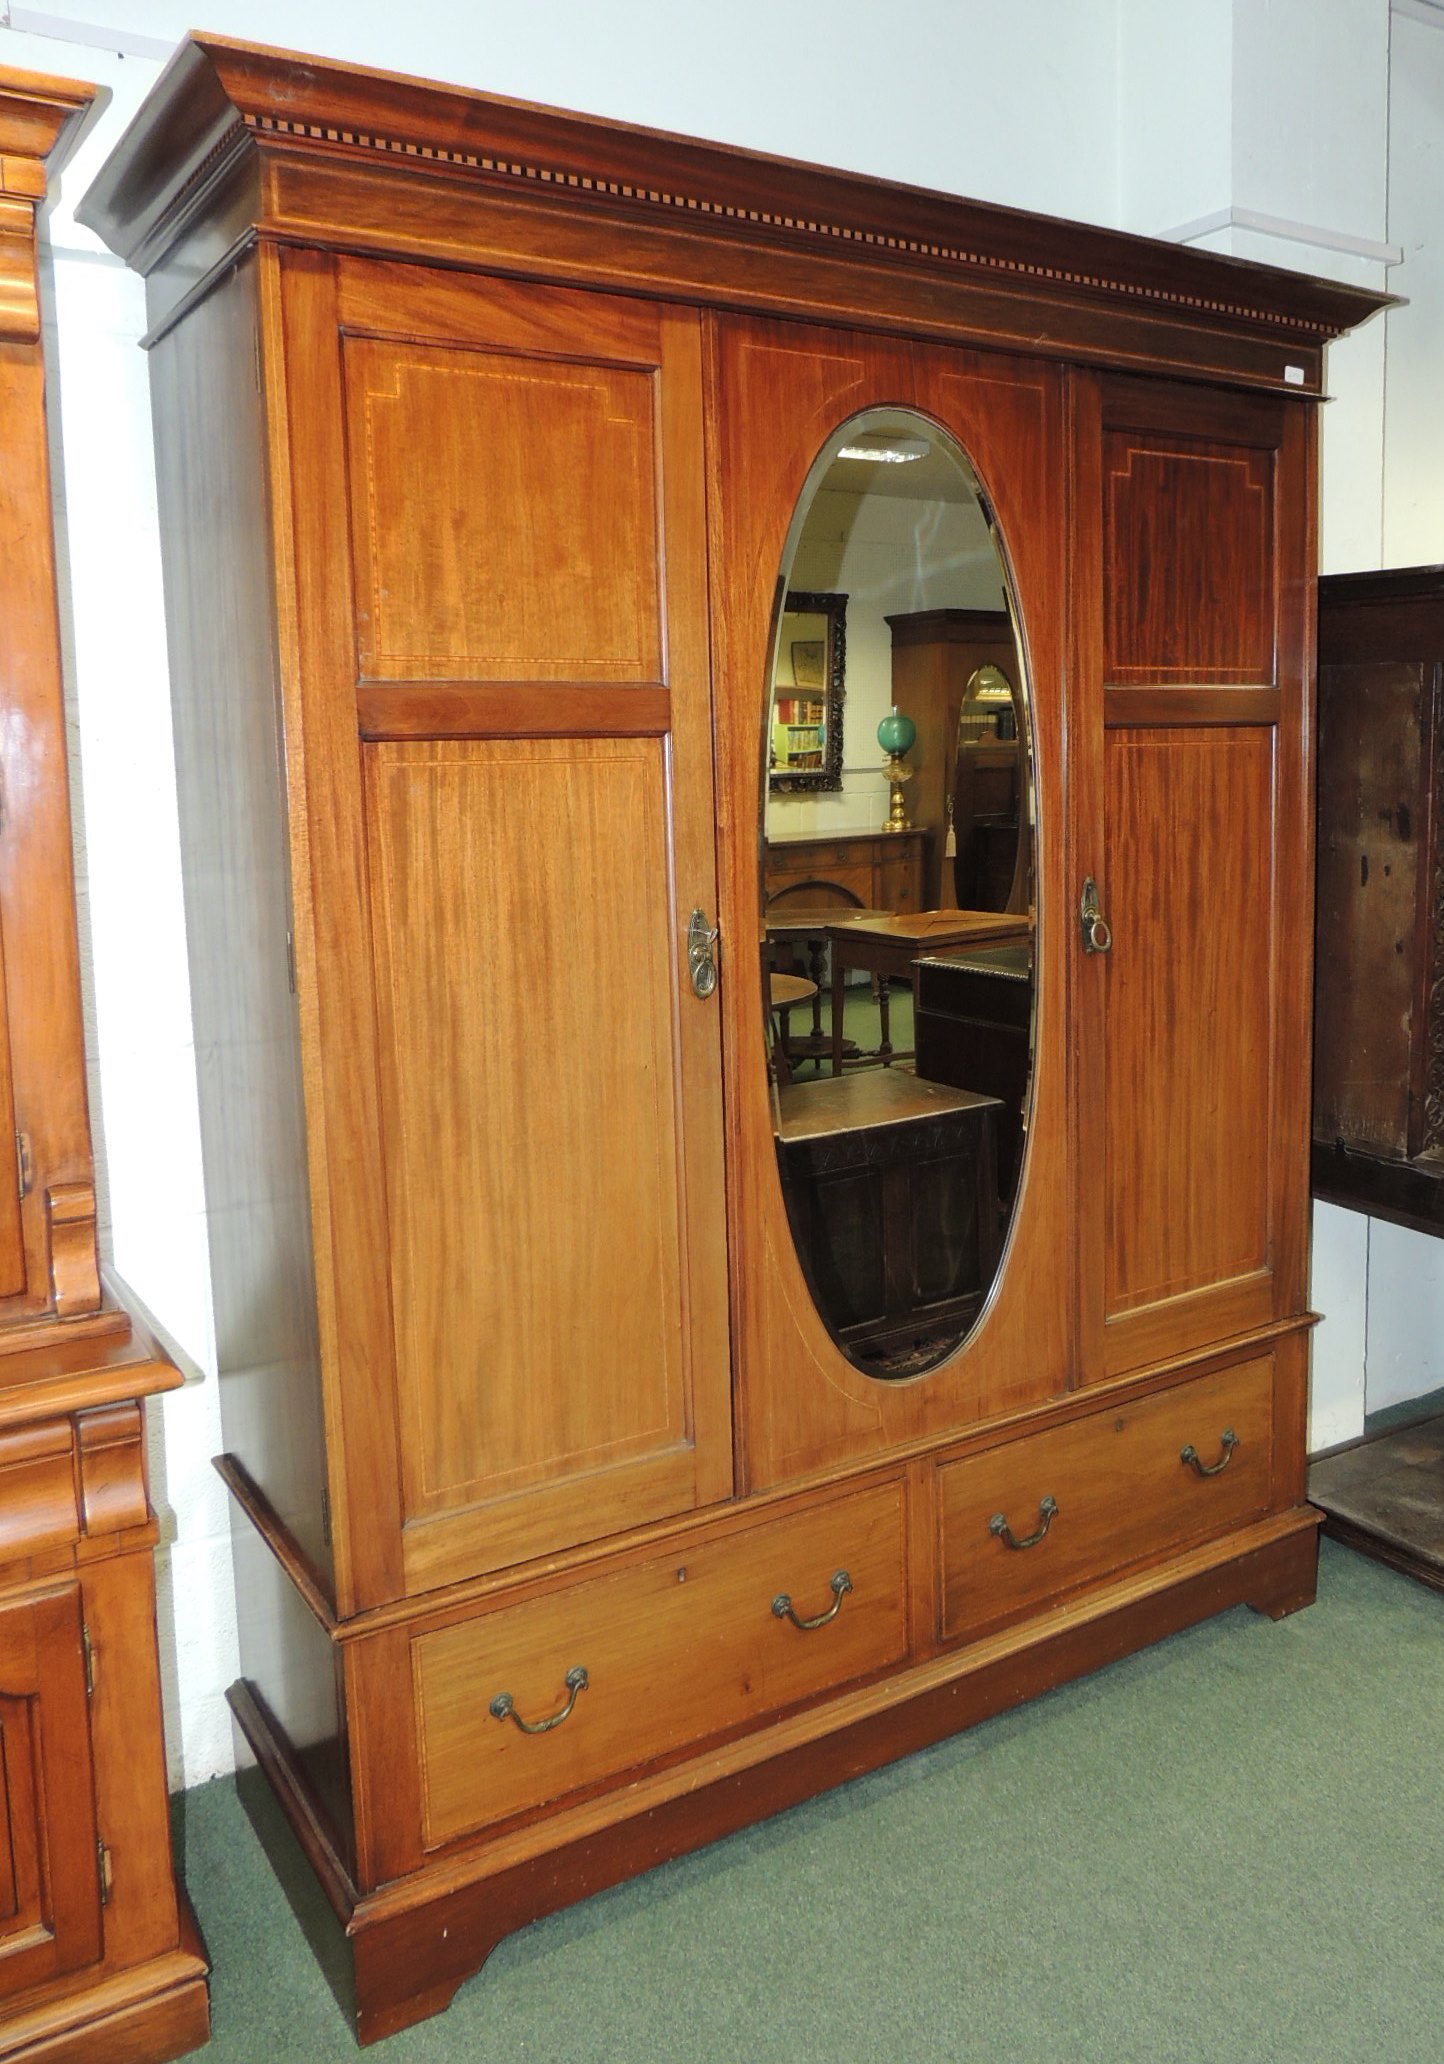 An early 20th century inlaid mahogany double wardrobe with moulded cornice, central oval bevelled